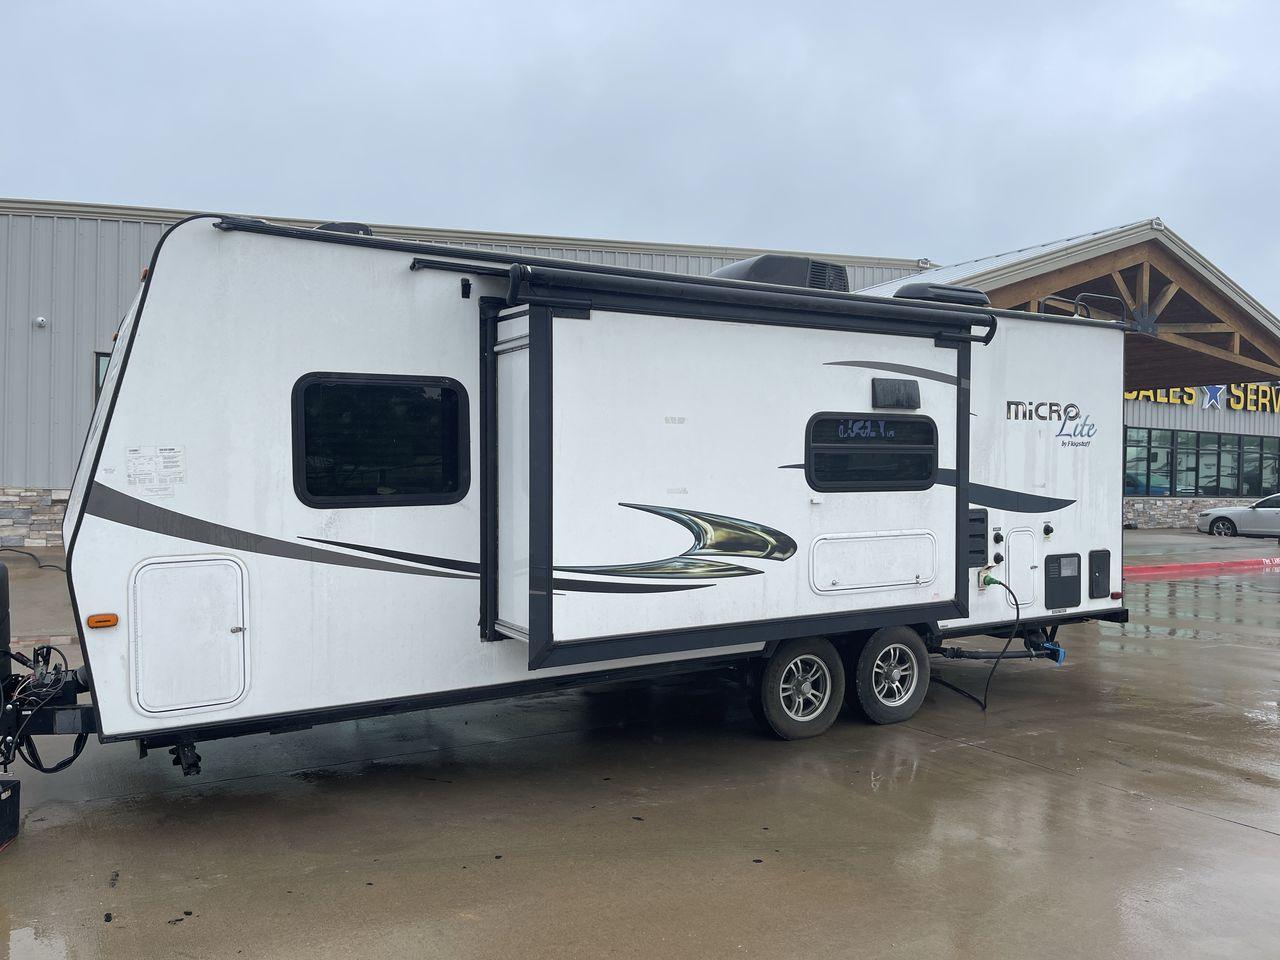 2015 FOREST RIVER FLAGSTAFF 25KS (4X4TFLA23FD) , Length: 25.67 ft. | Dry Weight: 4,310 lbs. | Gross Weight: 6,538 lbs. | Slides: 1 transmission, located at 4319 N Main Street, Cleburne, TX, 76033, (817) 221-0660, 32.435829, -97.384178 - The 2015 Forest River Flagstaff 25KS is a dual-axle steel wheel set-up measuring 25.67 ft. in length. It has a dry weight of 4,310 lbs. and a GVWR of 6,538 lbs. It has 1 power slide. Its exterior comes with a power awning with LED lights underneath to light up your campsite, plus a couple of spea - Photo #24